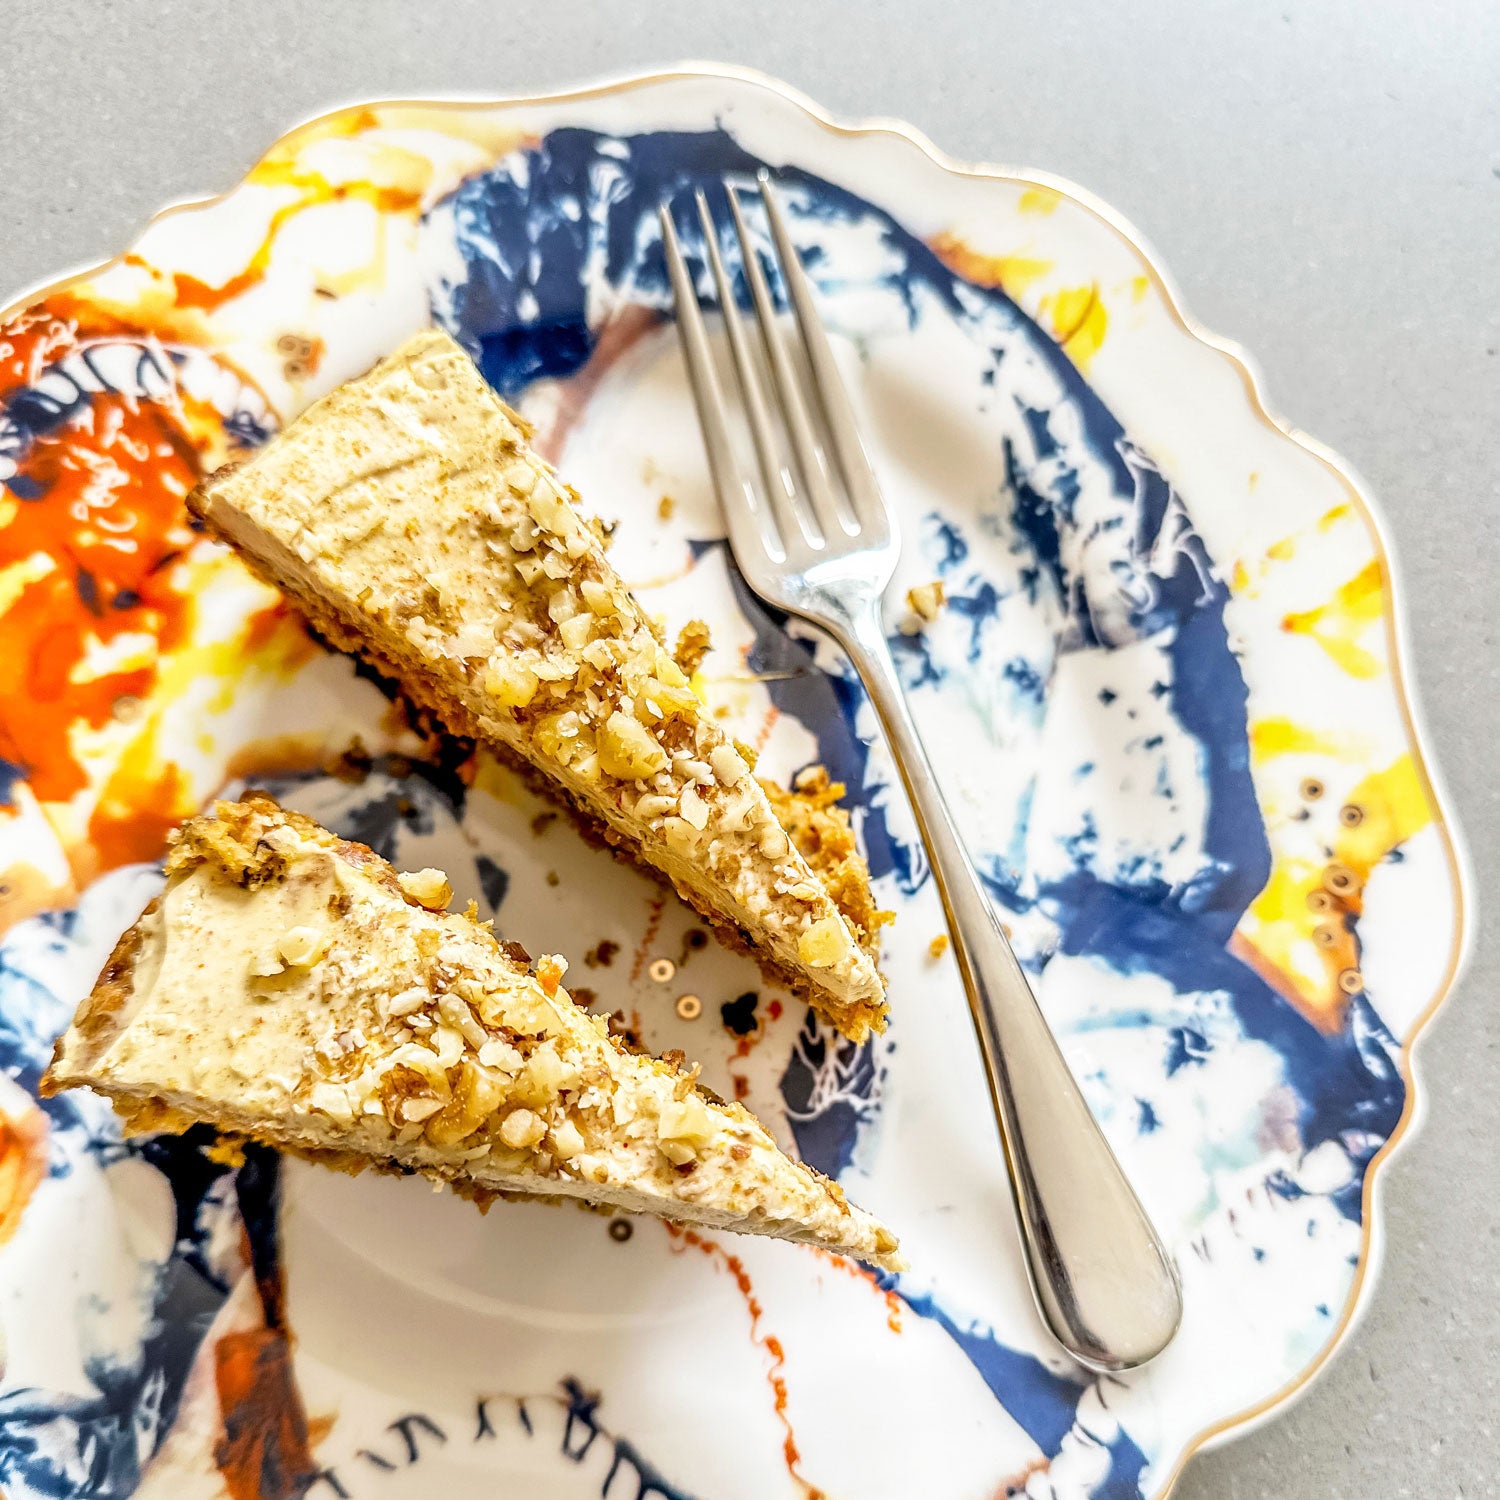 Immunity Booster - Supercharged Carrot Cake